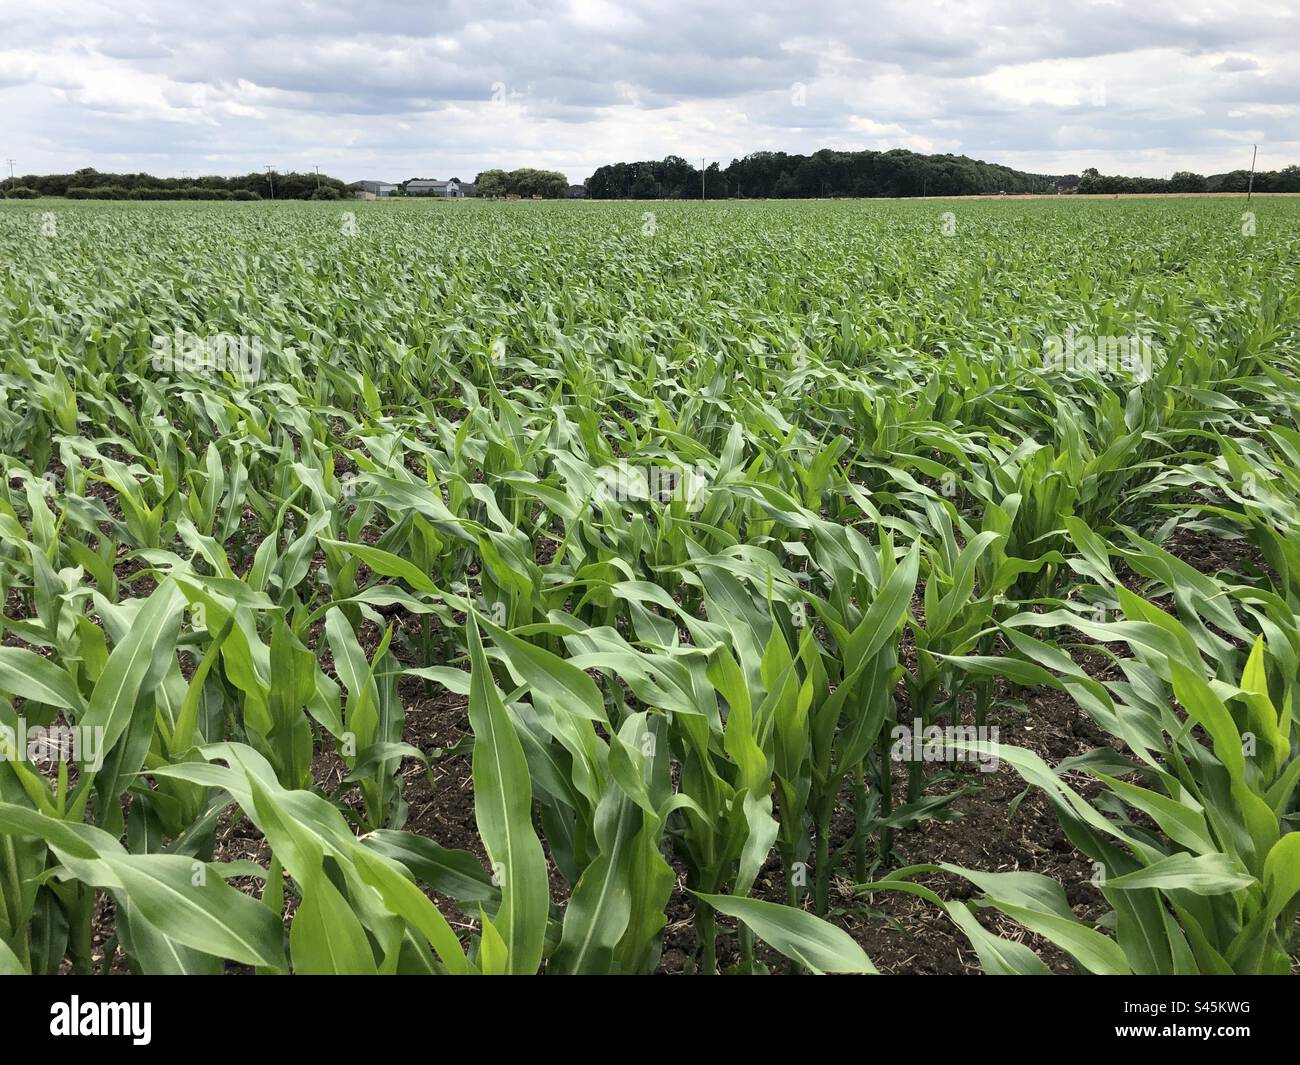 A crop of maize grown for electricity energy production in North Lincolnshire, England, United Kingdom Stock Photo